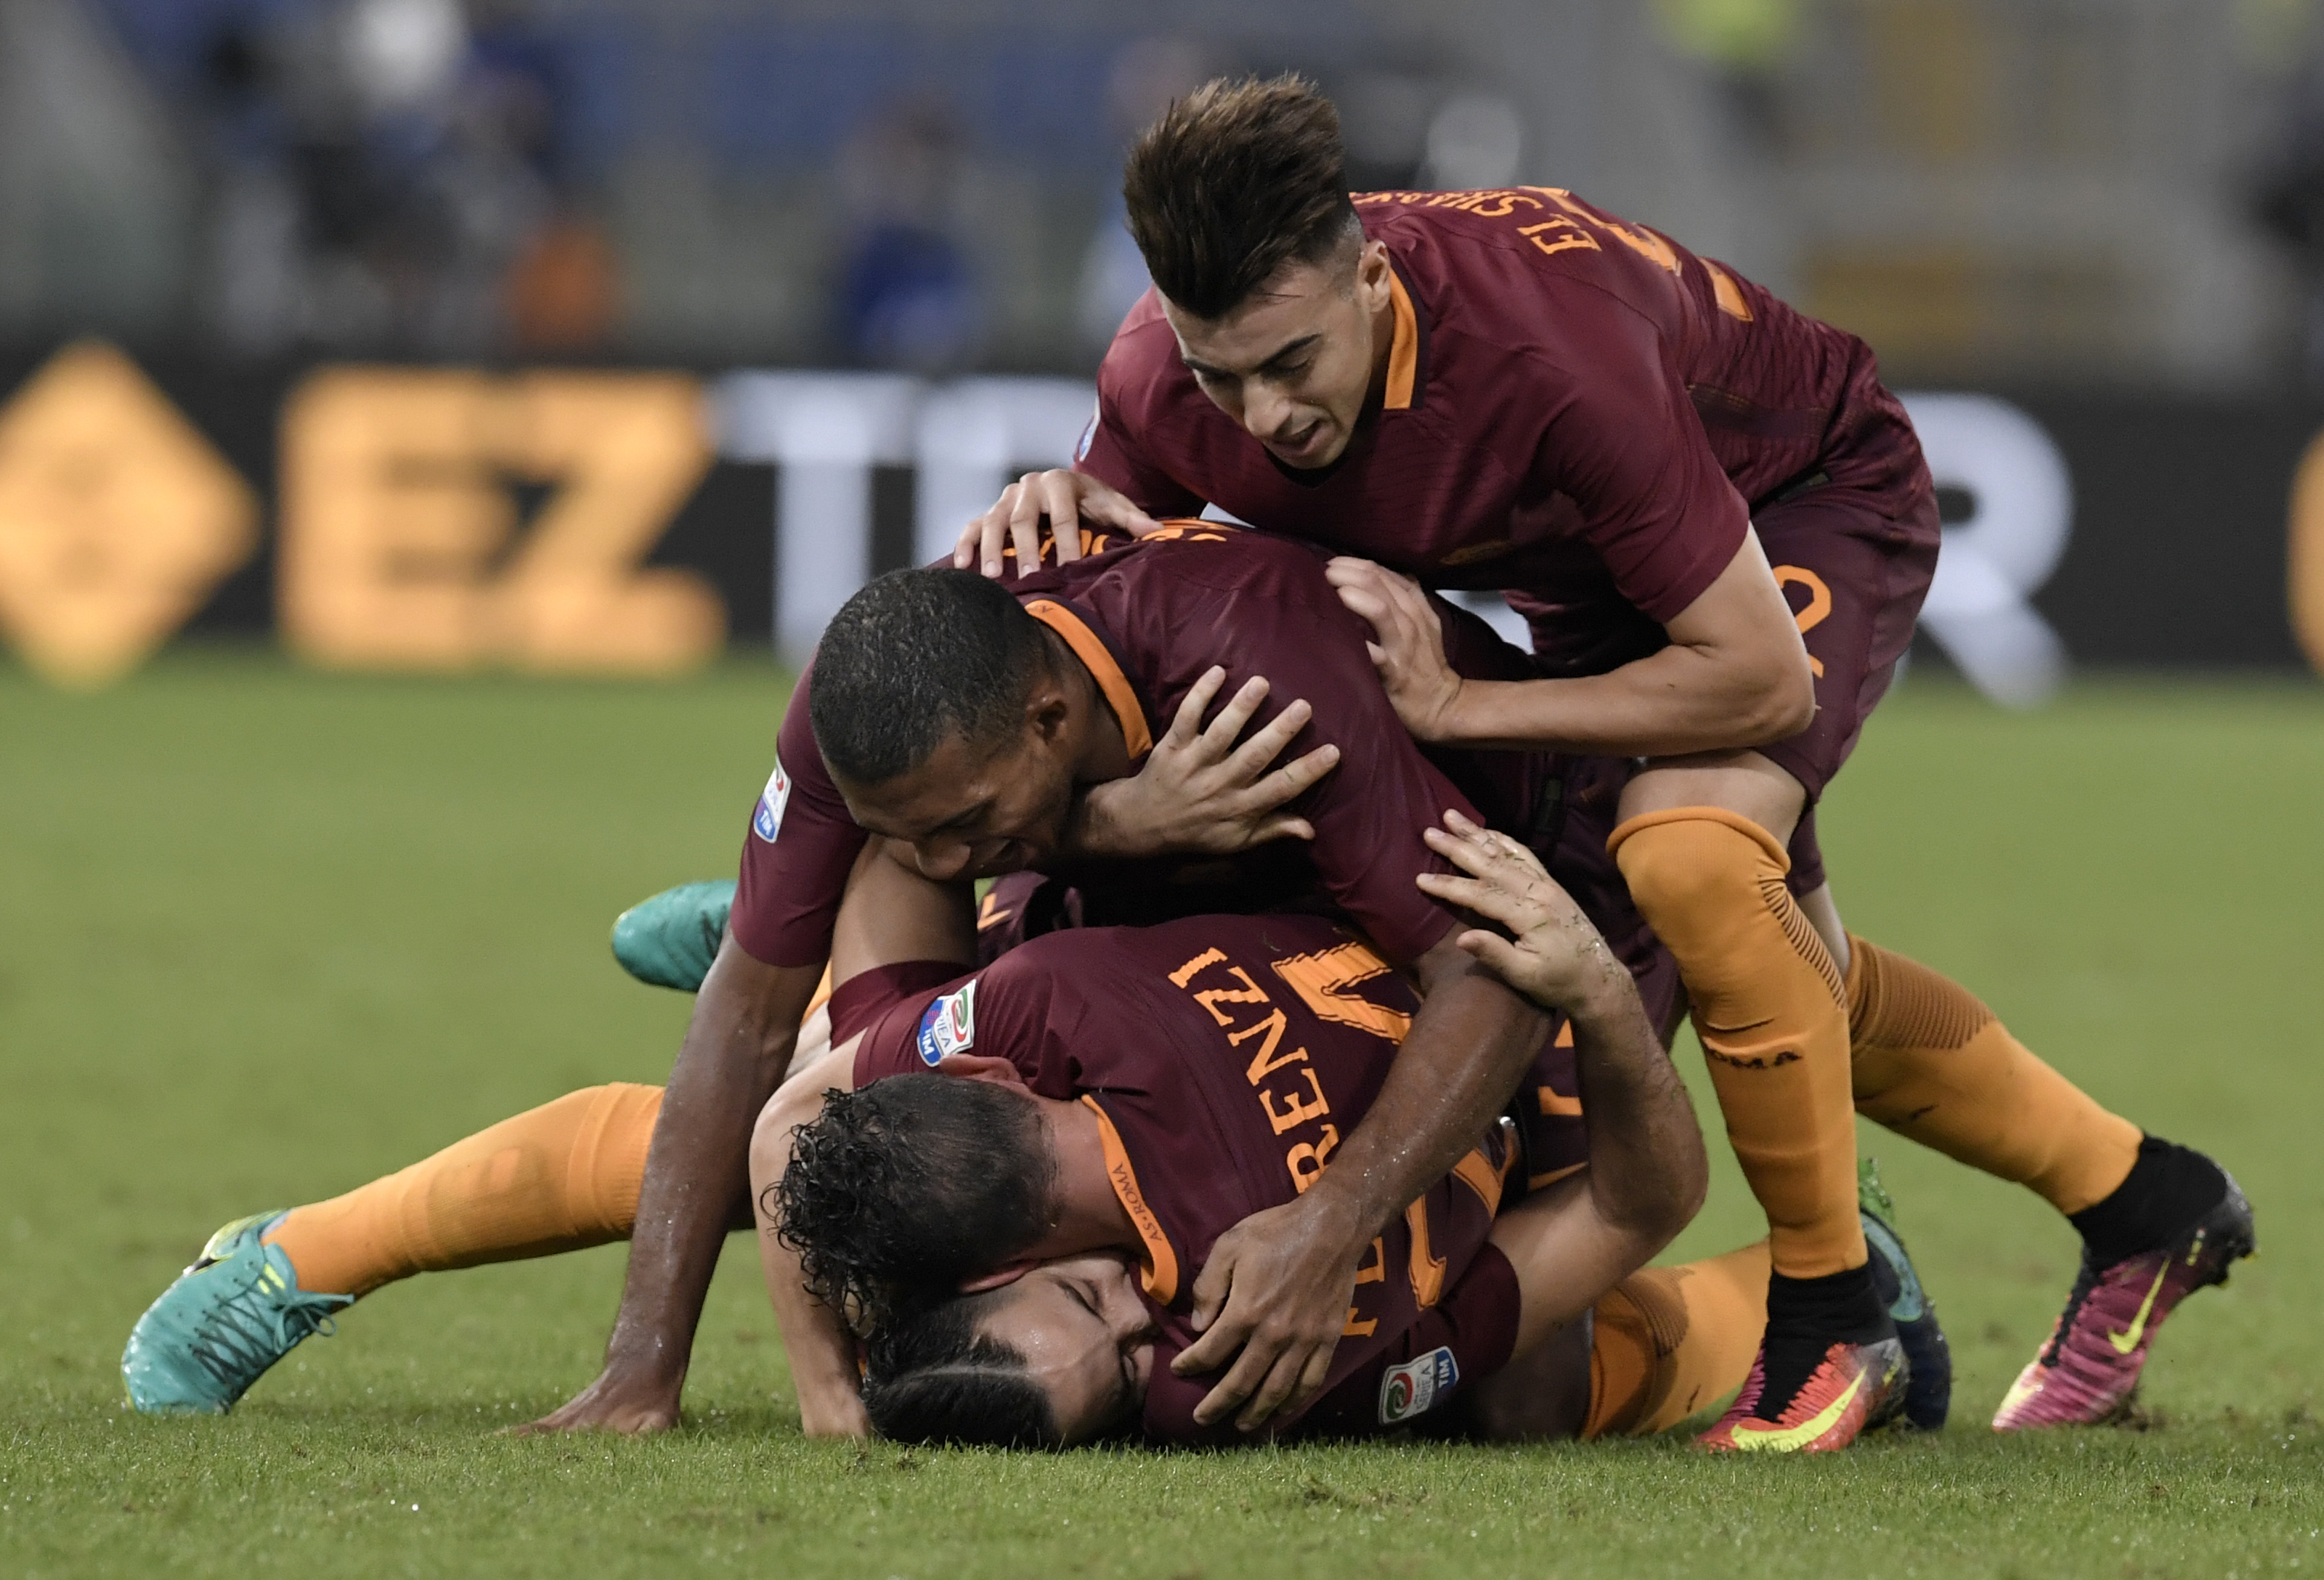 Max De Luca – Five Things We Learned From Inter’s 2-1 Loss To Roma